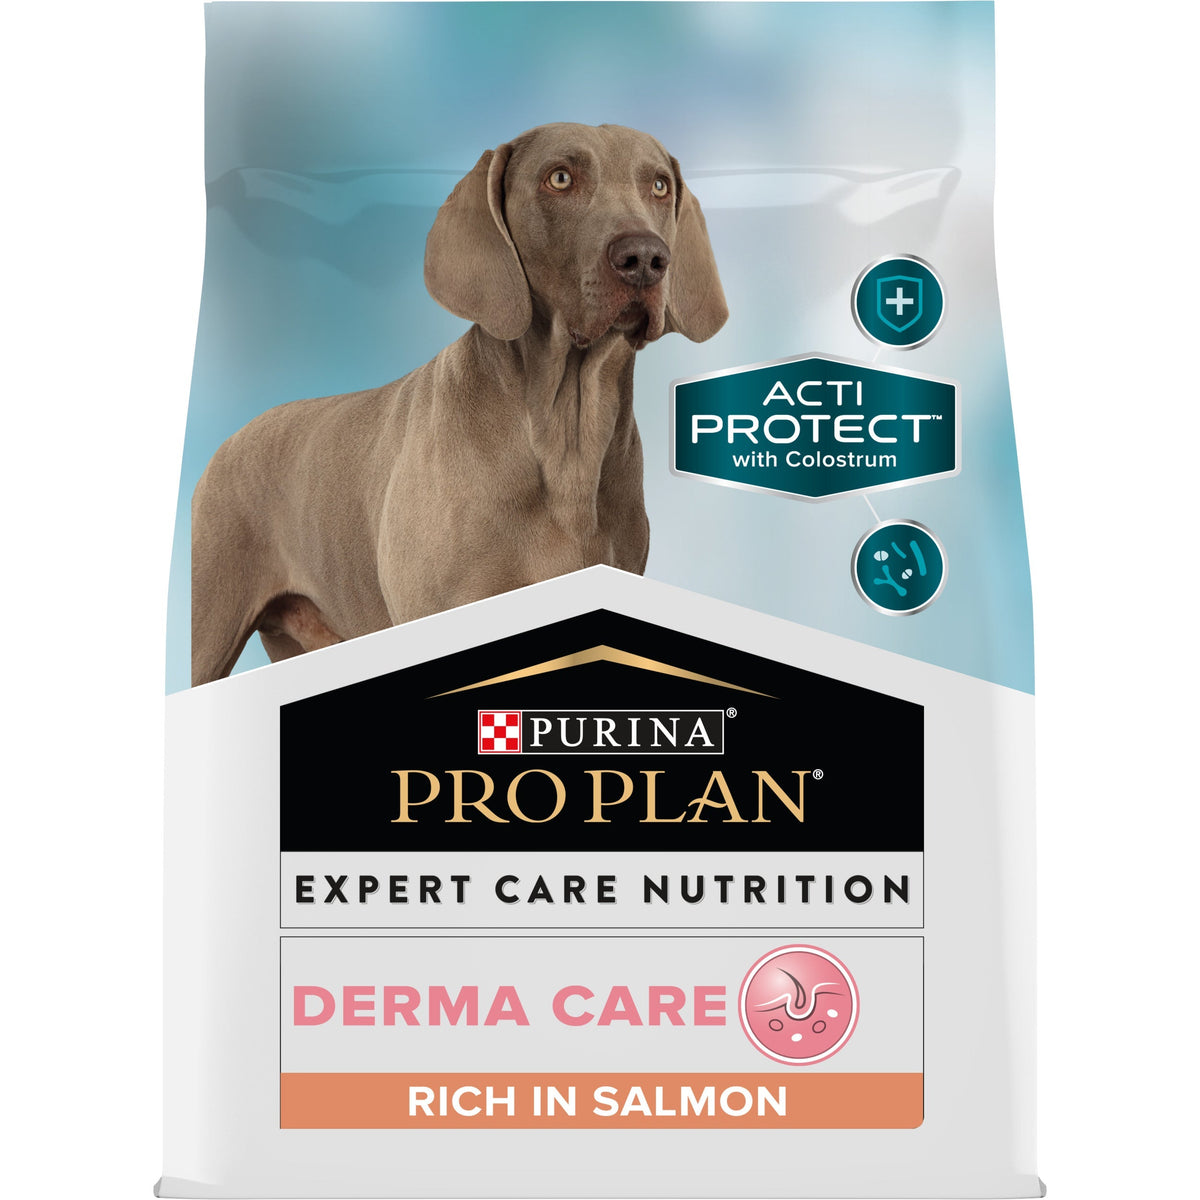 PURINA® PRO PLAN® Expert Care Nutrition - Canine Adult Derma Care - Salmon 3kg